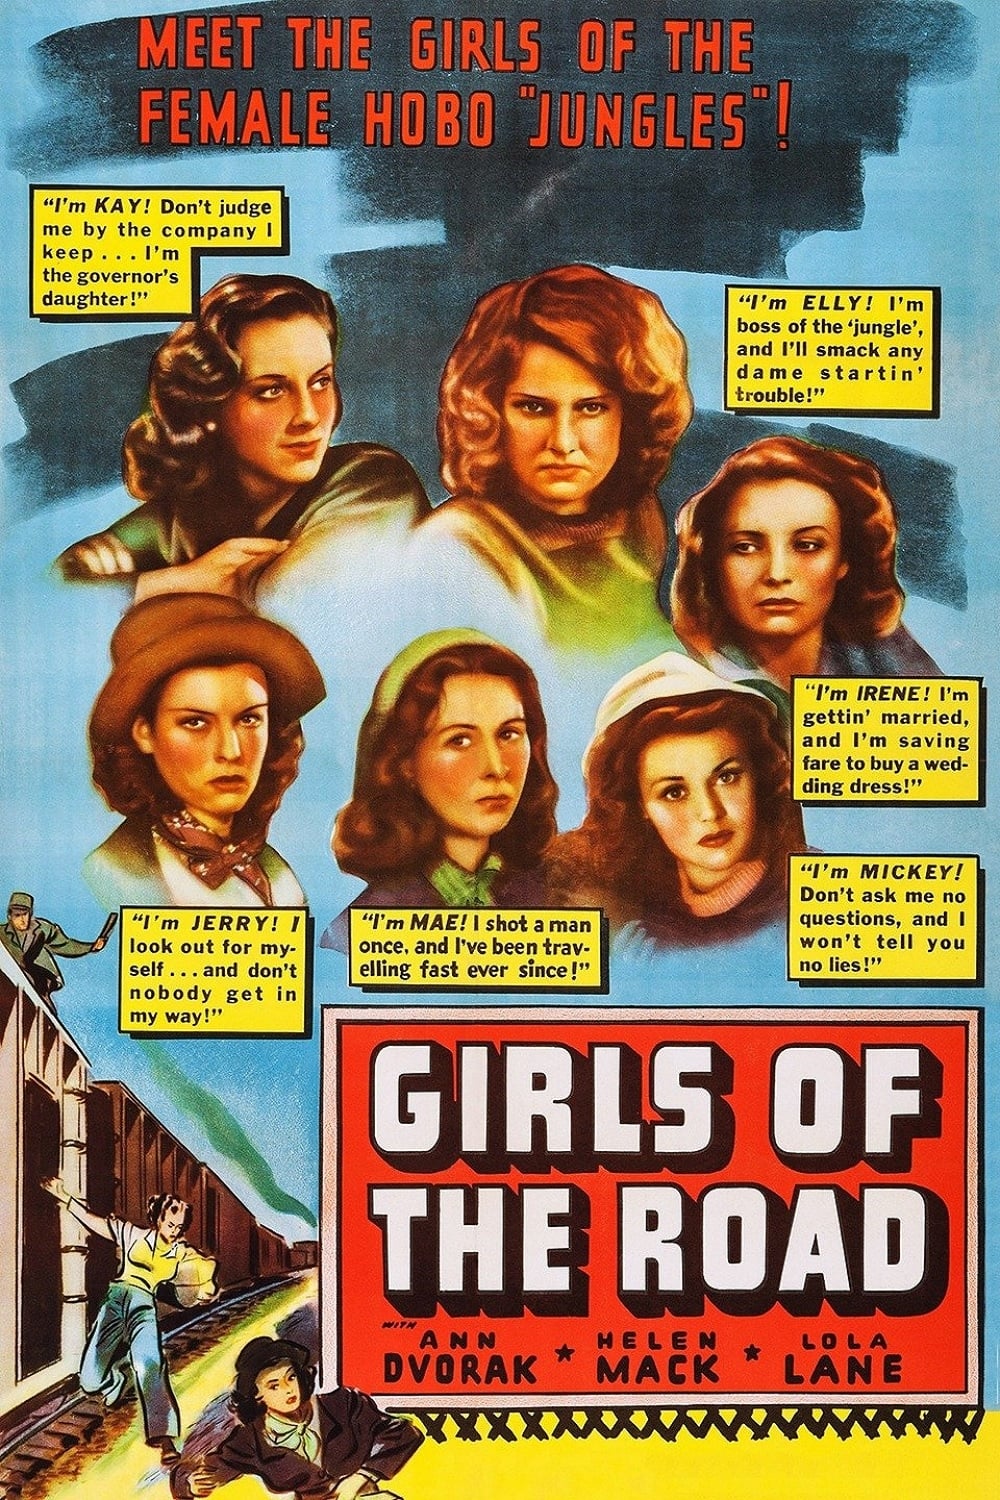 Girls of the Road (1940)